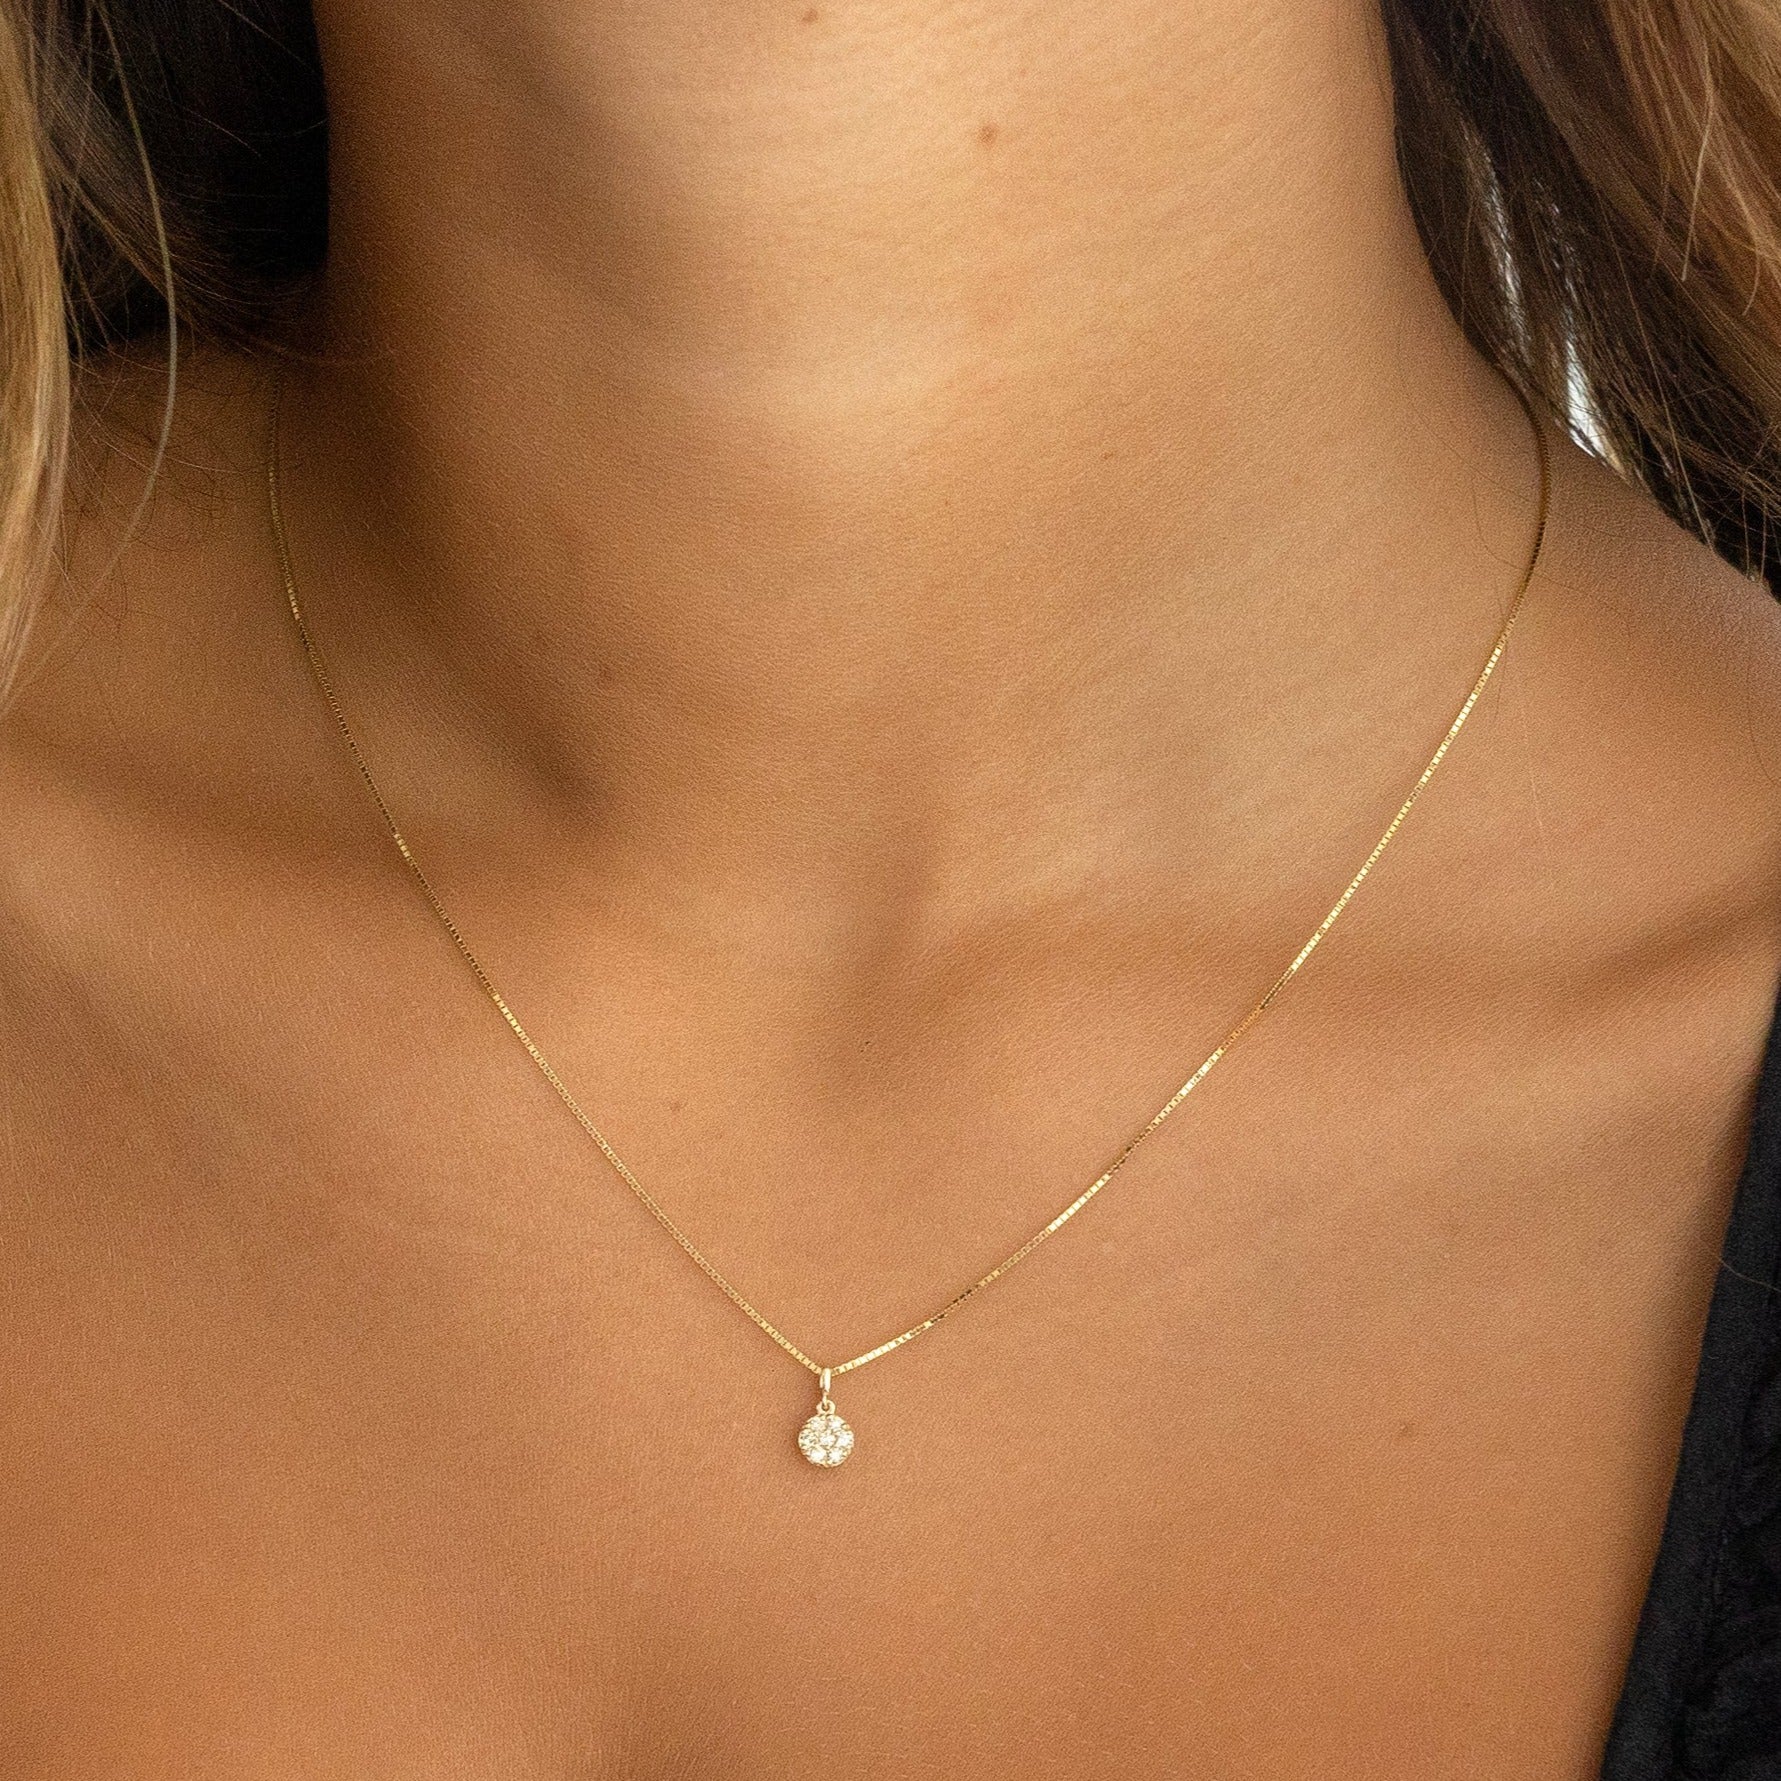 Rosecliff Small Circle Diamond Necklace in 14k Gold (April)